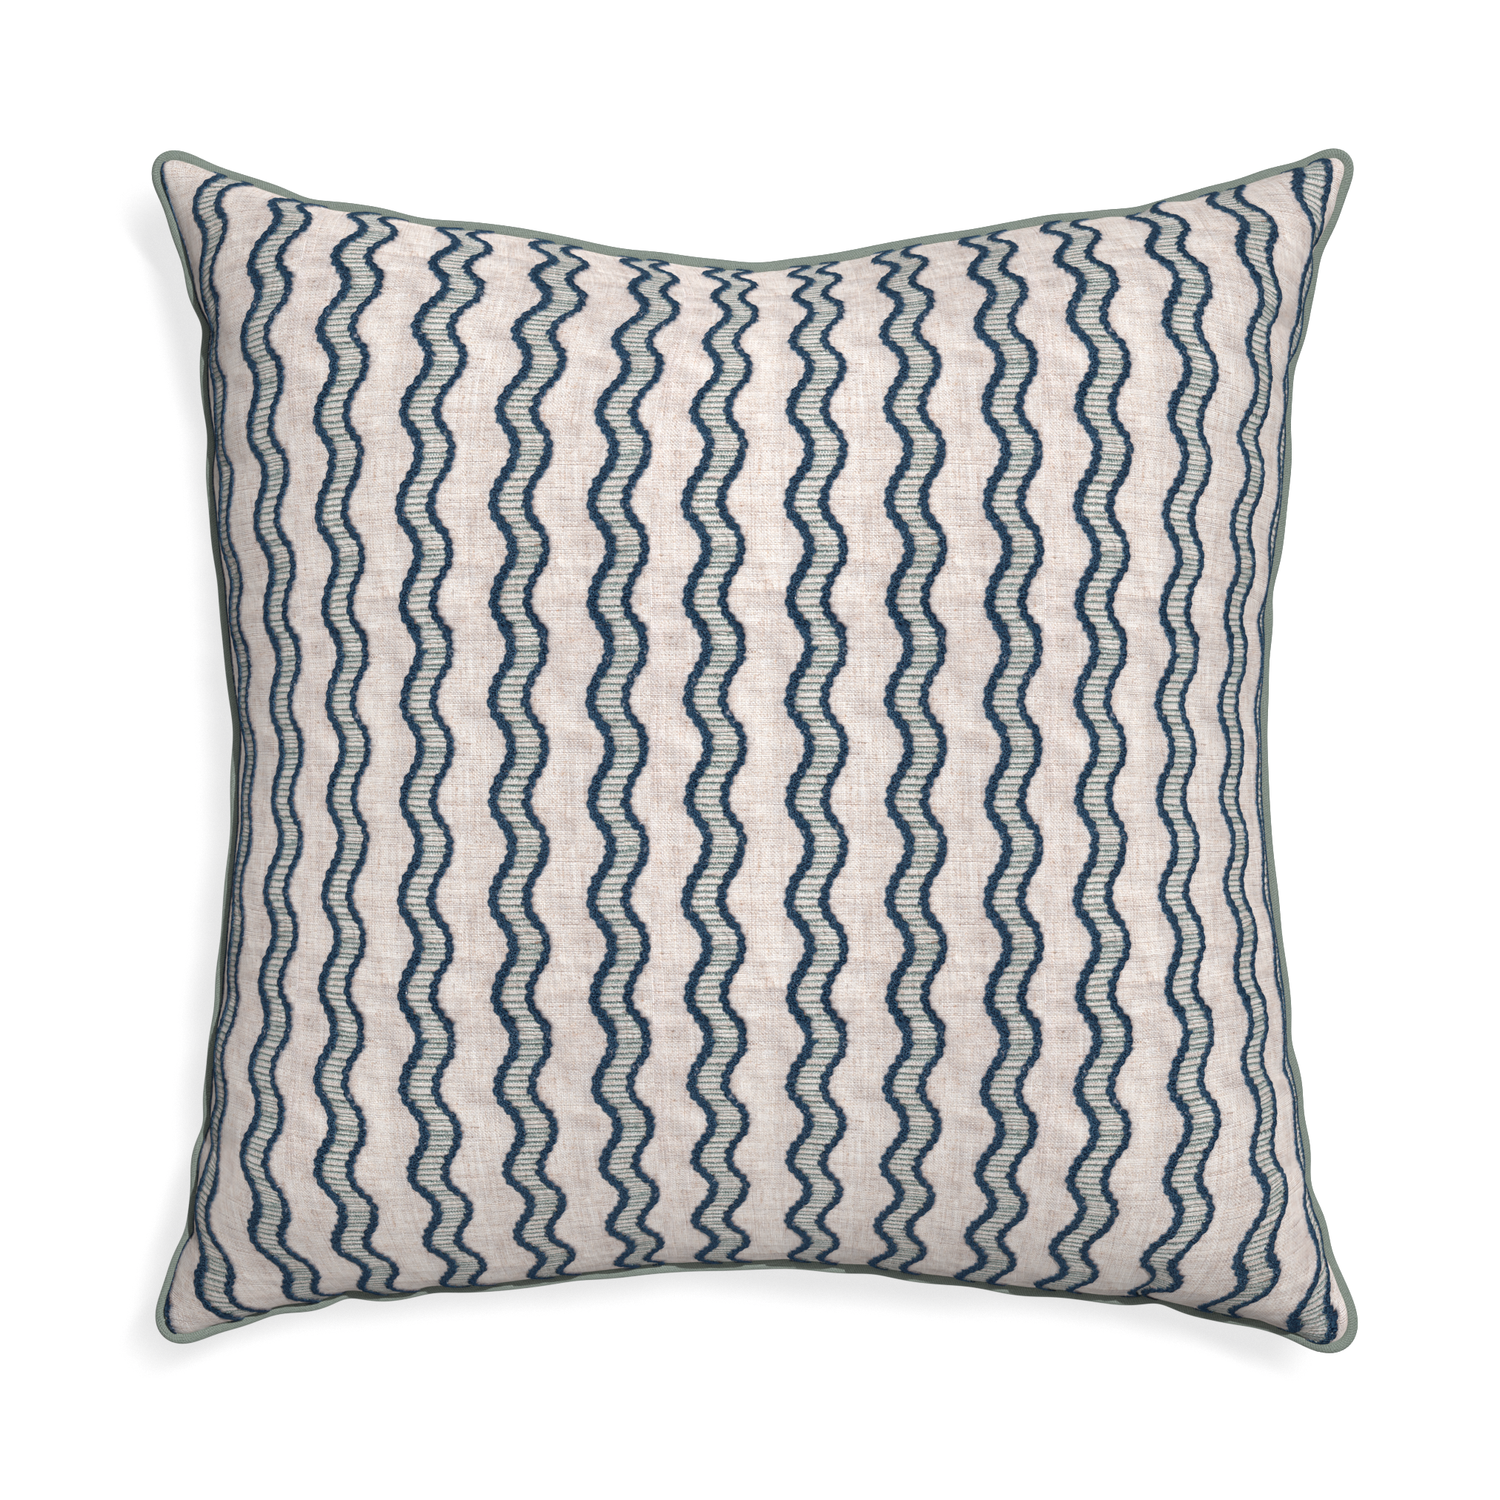 Euro-sham beatrice custom embroidered wavepillow with sage piping on white background